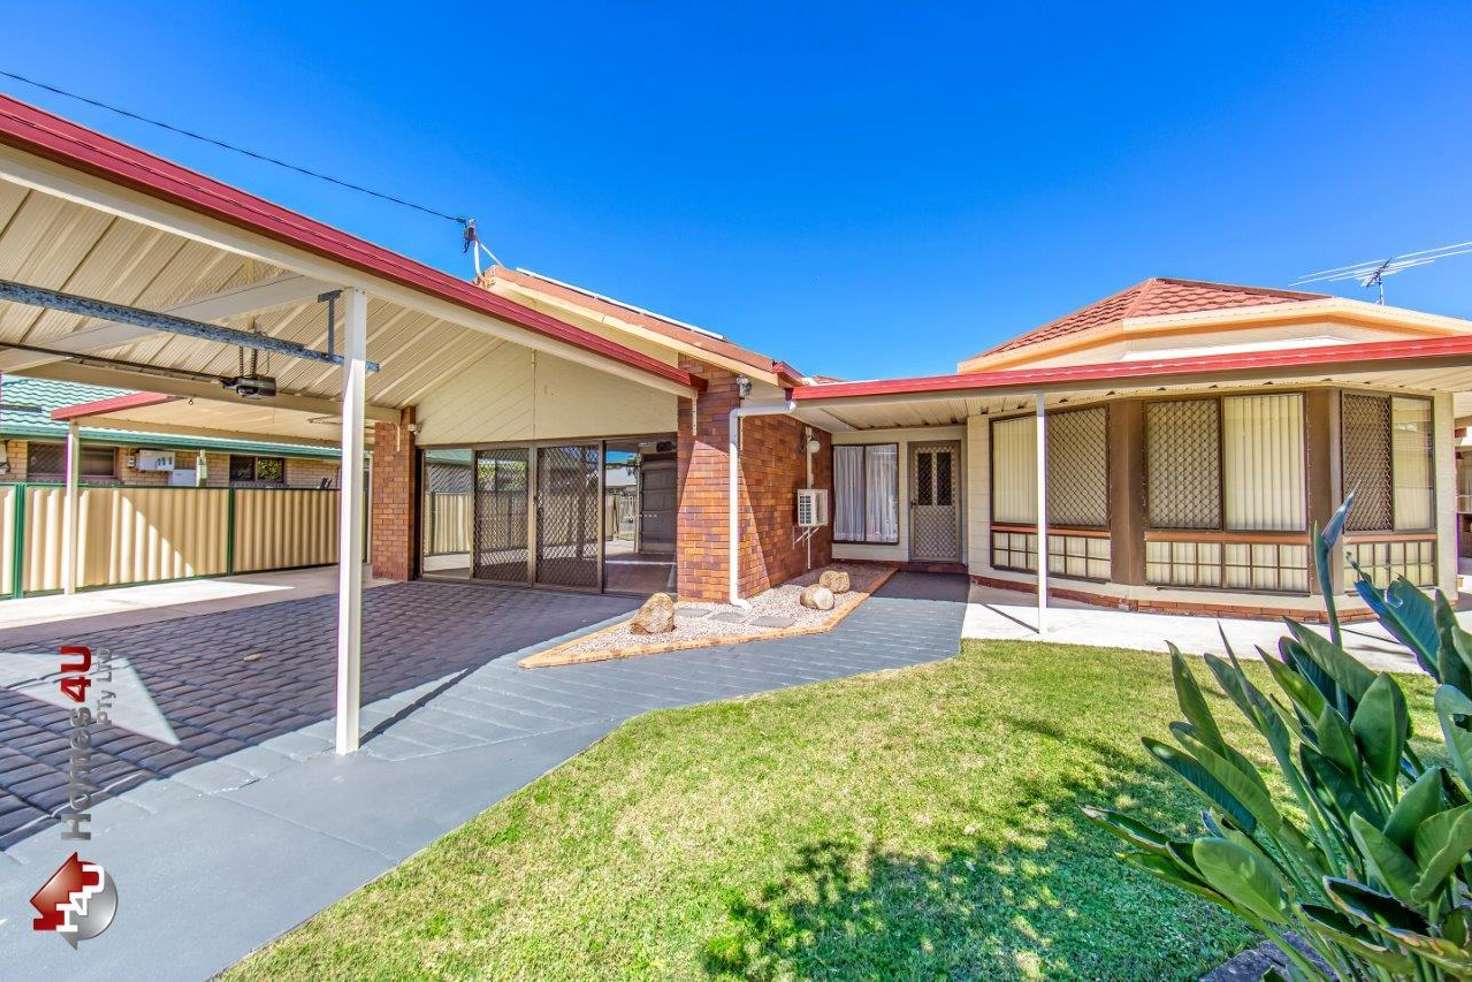 Main view of Homely house listing, 47 Marsala St, Kippa-ring QLD 4021